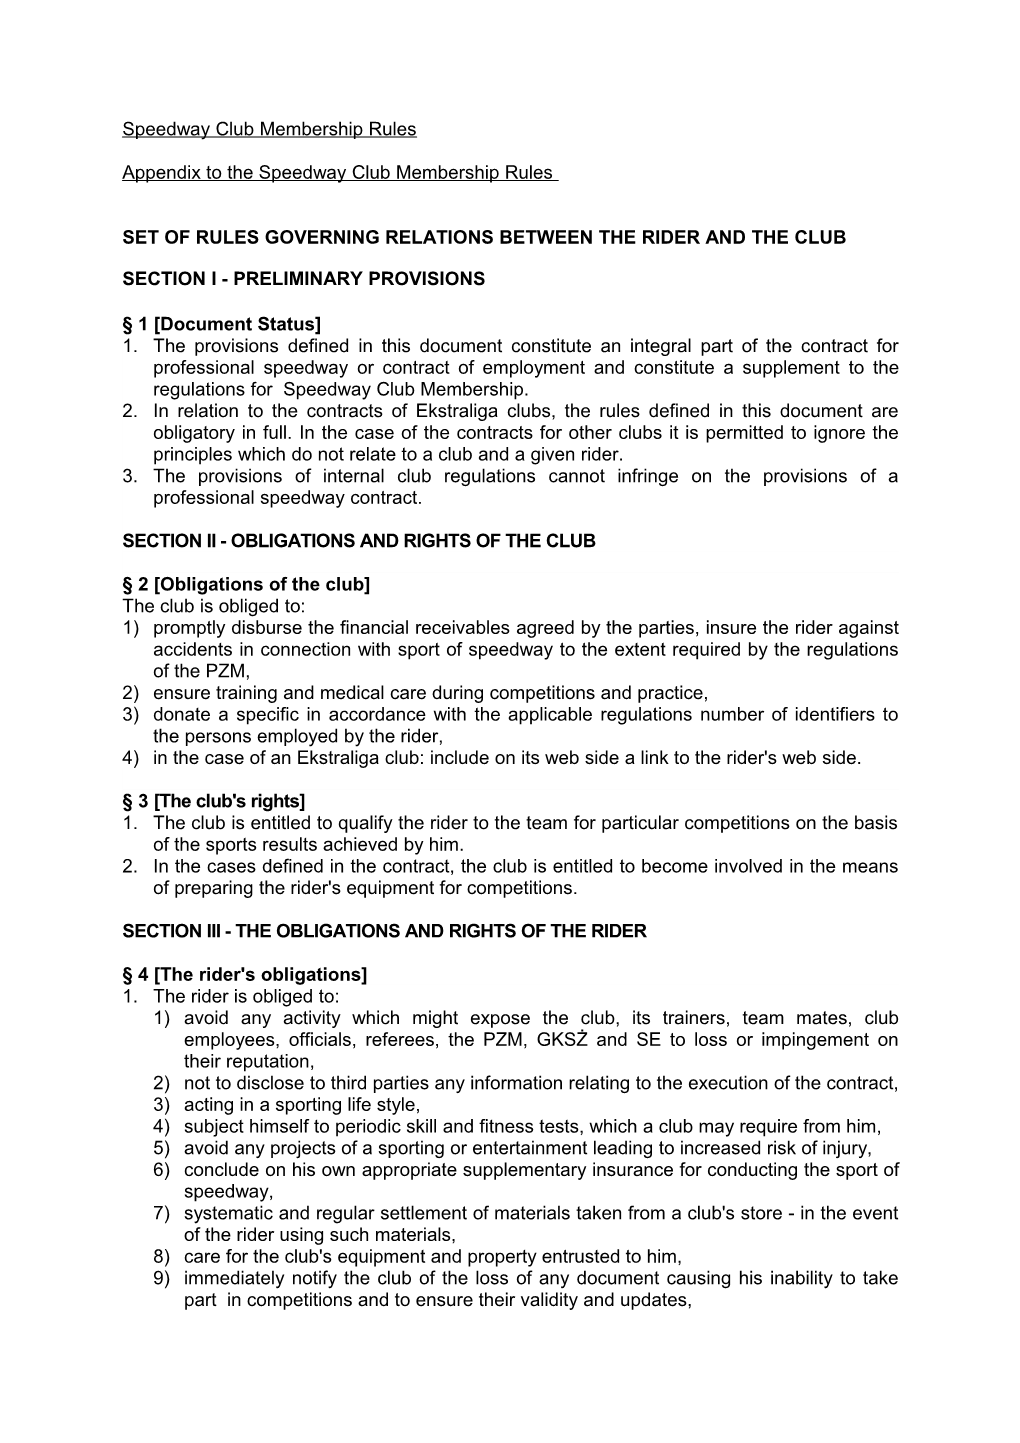 Set of Rules Governing Relations Between the Rider and the Club